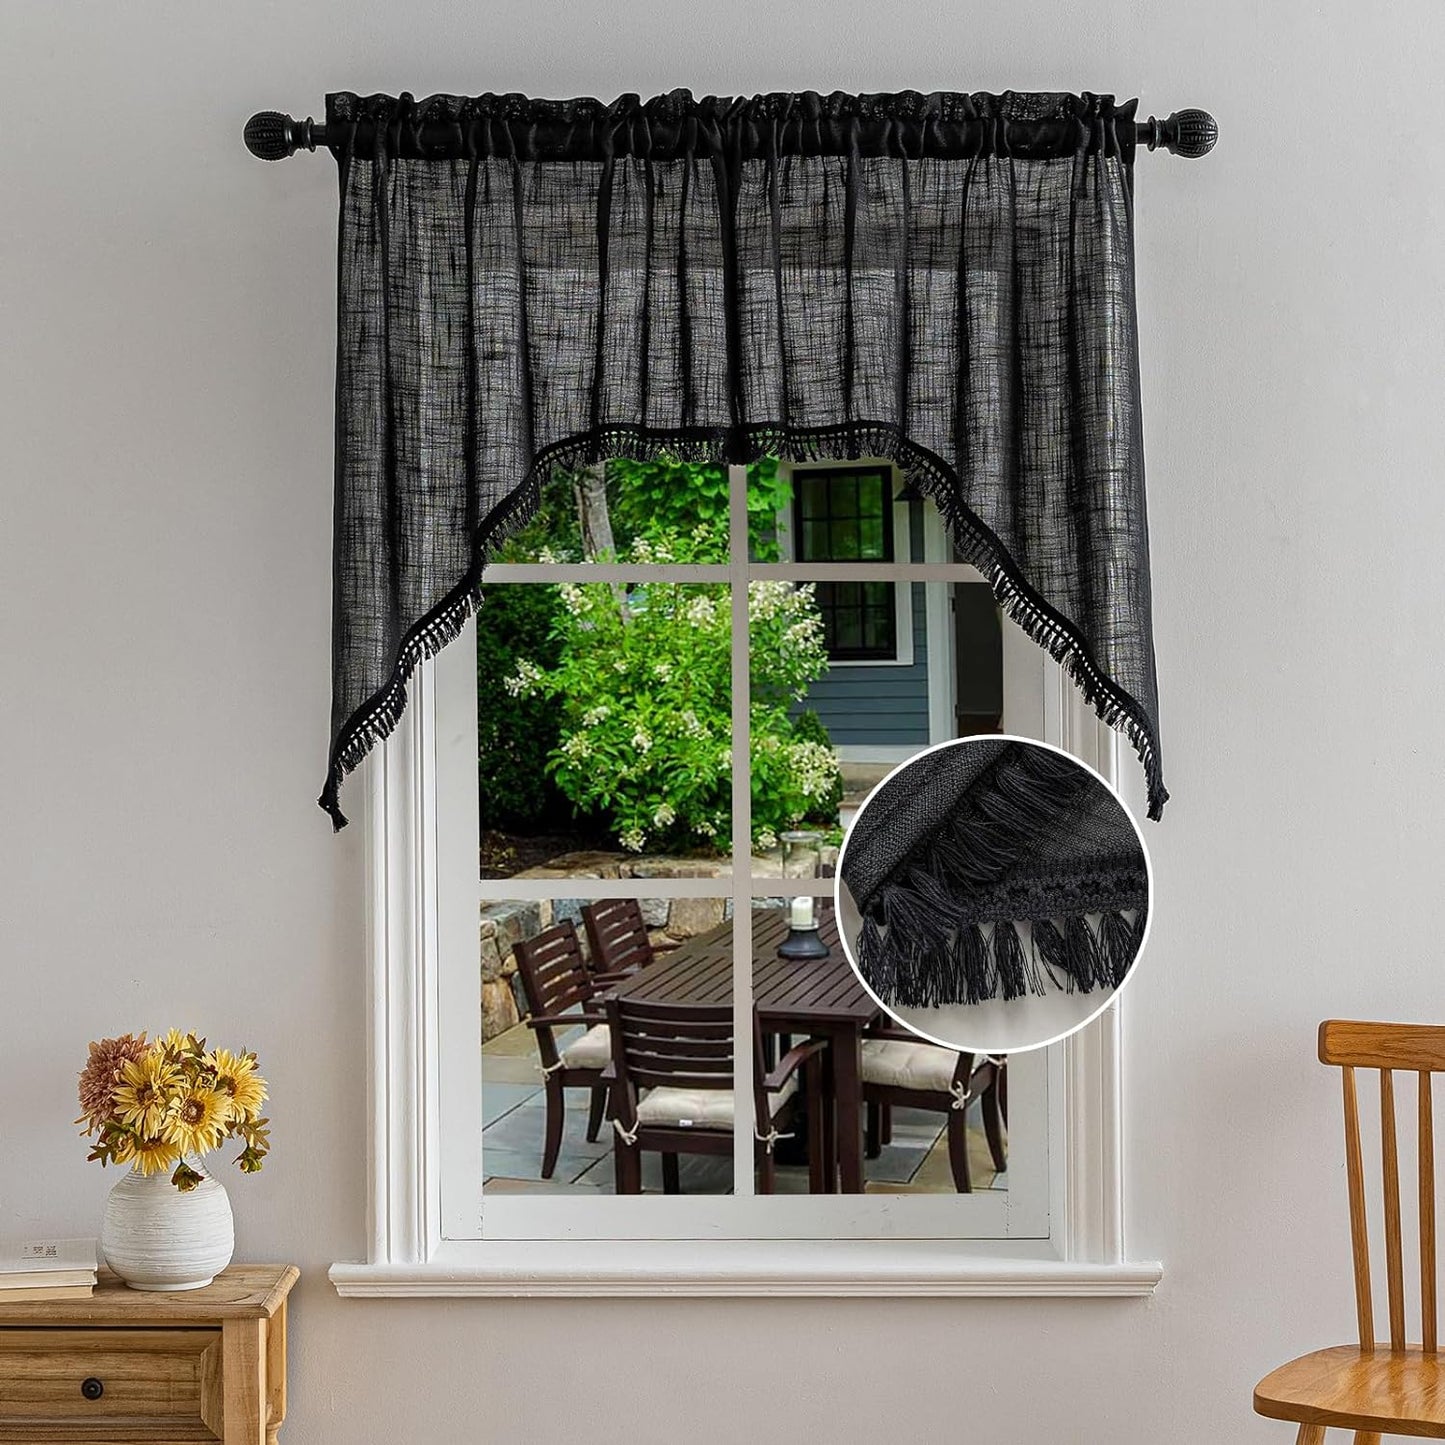 Beda Home Tassel Linen Textured Swag Curtain Valance for Farmhouses’ Kitchen; Light Filtering Rustic Short Swag Topper for Small Windows Bedroom Privacy Added Rod Pocket Design(Nature 36X63-2Pcs)  BD BEDA HOME Black 36Wx36L - 2 Panels 